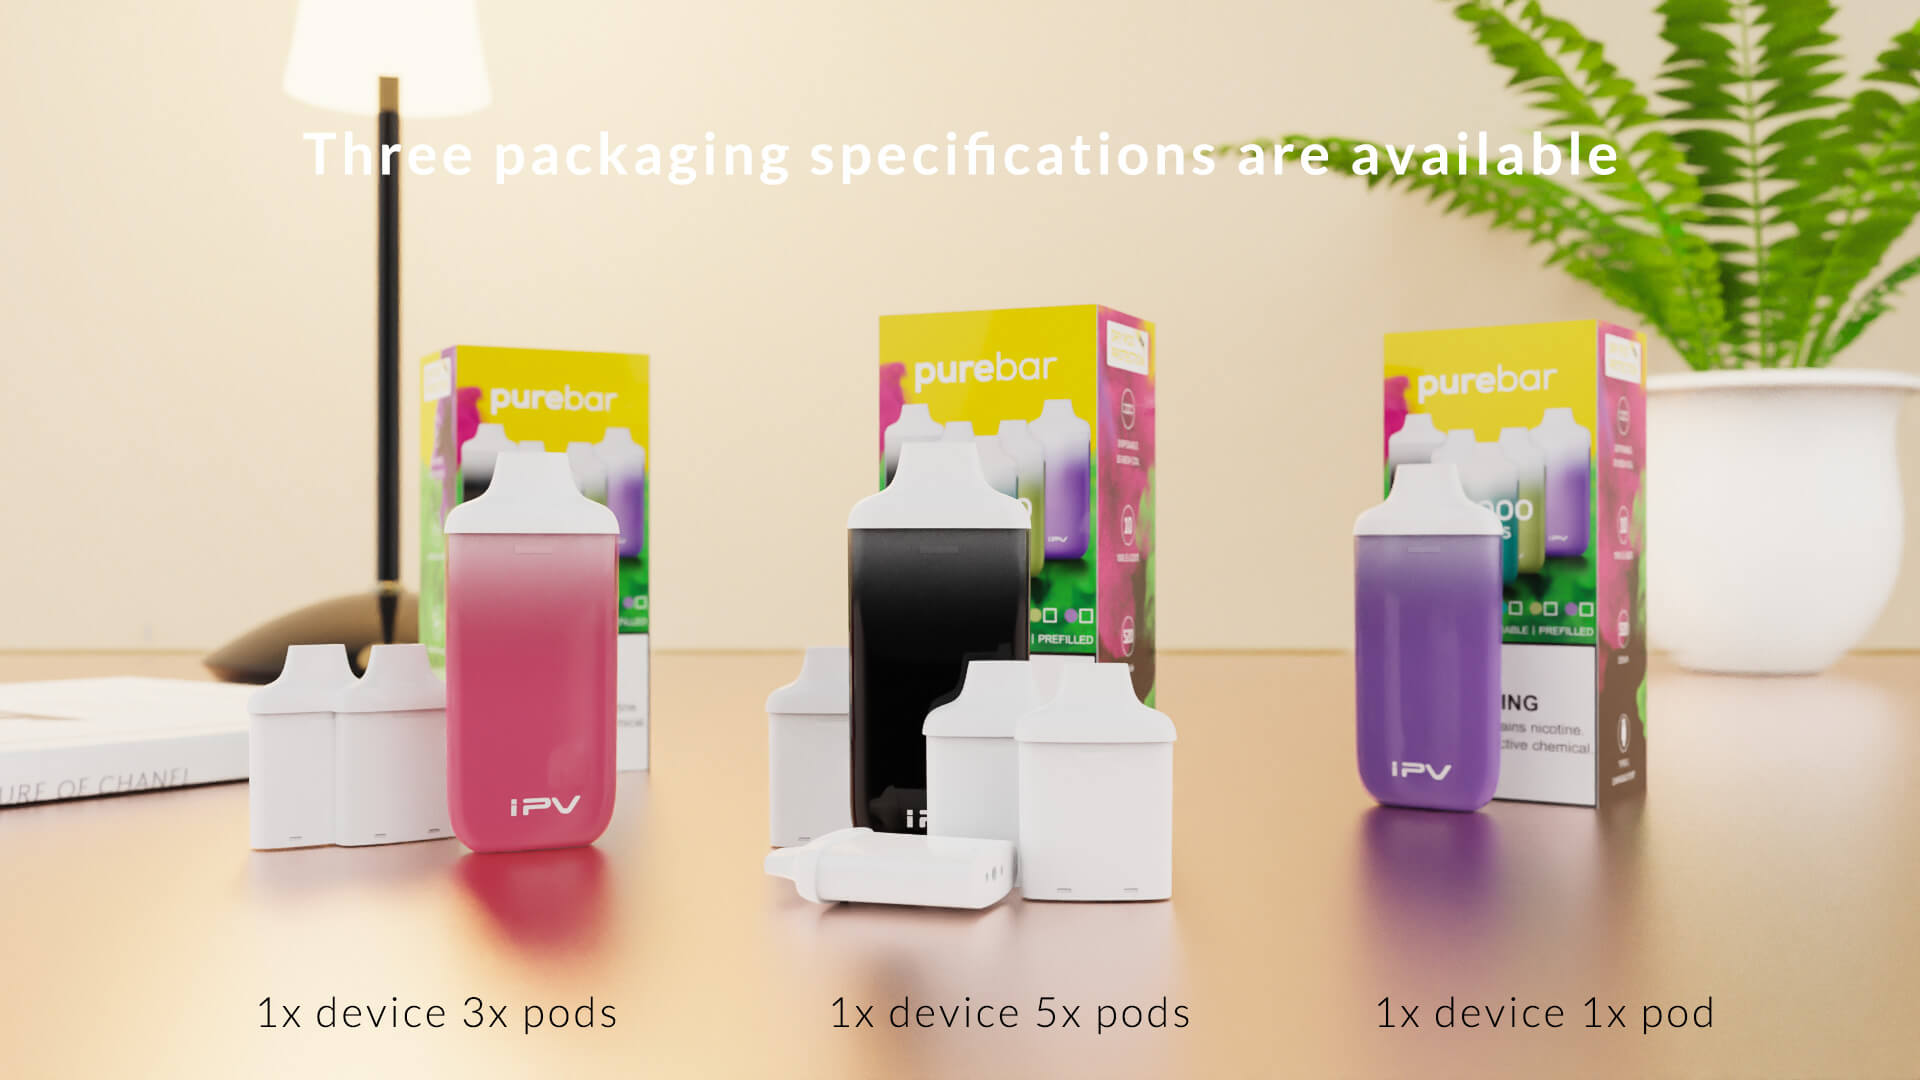 Three-packaging-specifications-are-available.jpg